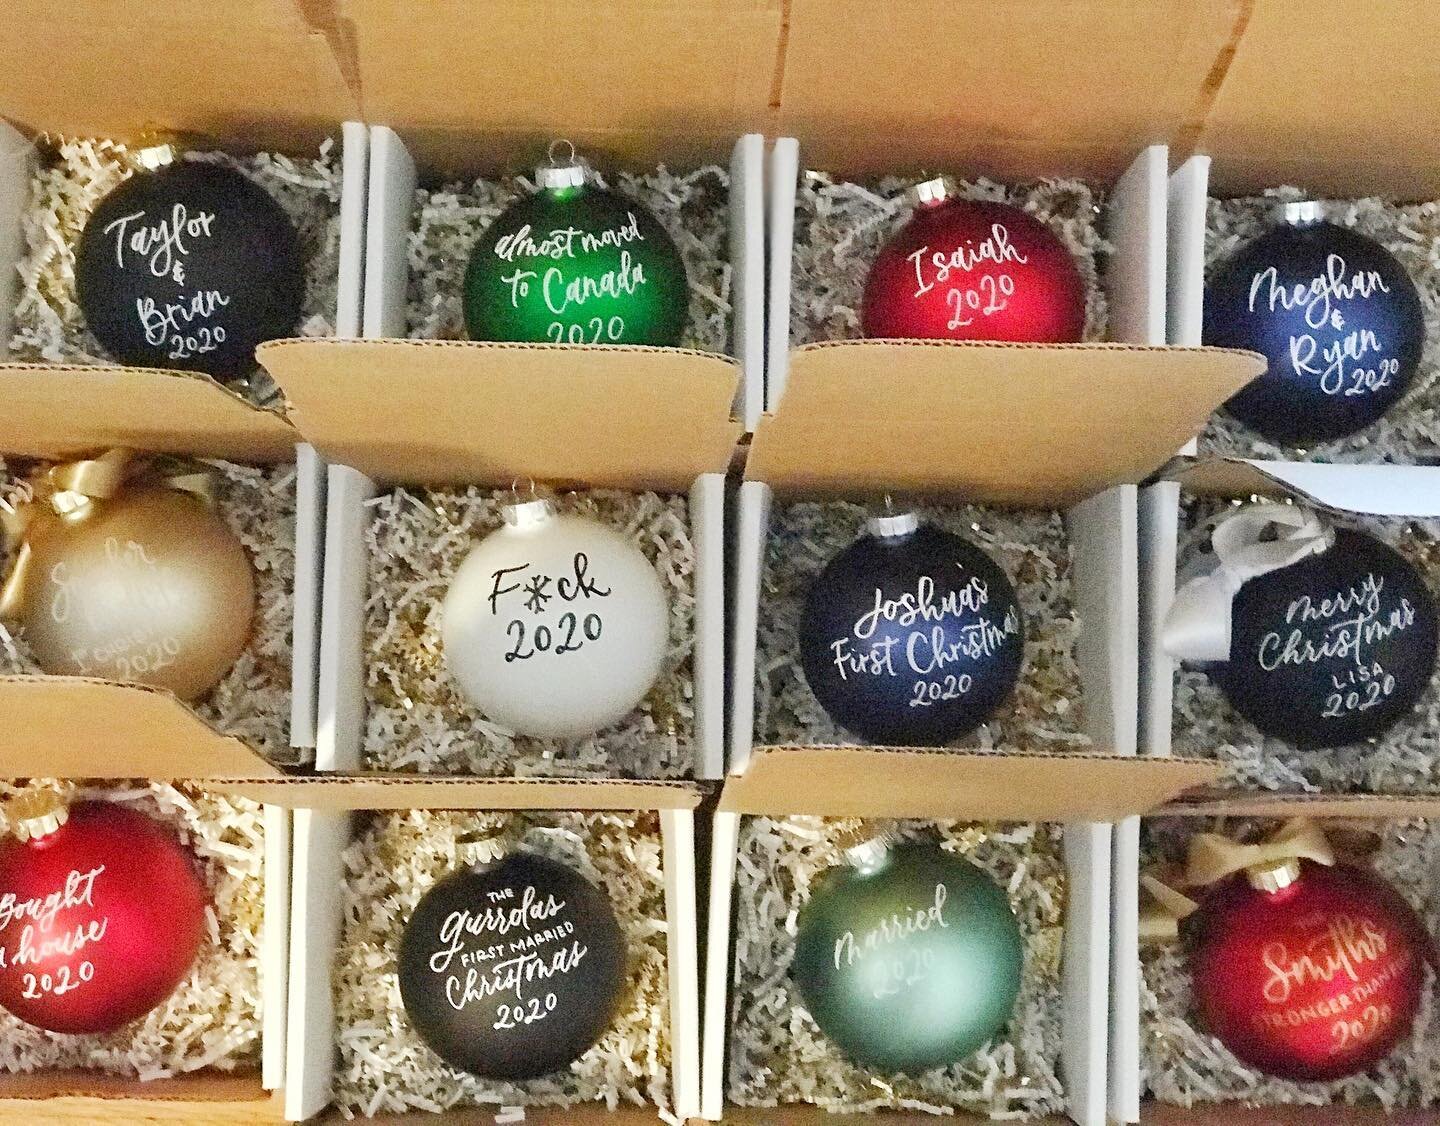 Ornaments on ornaments on ornaments! Get em while they&rsquo;re hot! Only have a few matte ones left, but lots of shiny!✨
Personalized ornaments make a great gift, and any order placed before Dec. 15th will go out ASAP so they make it before Christma